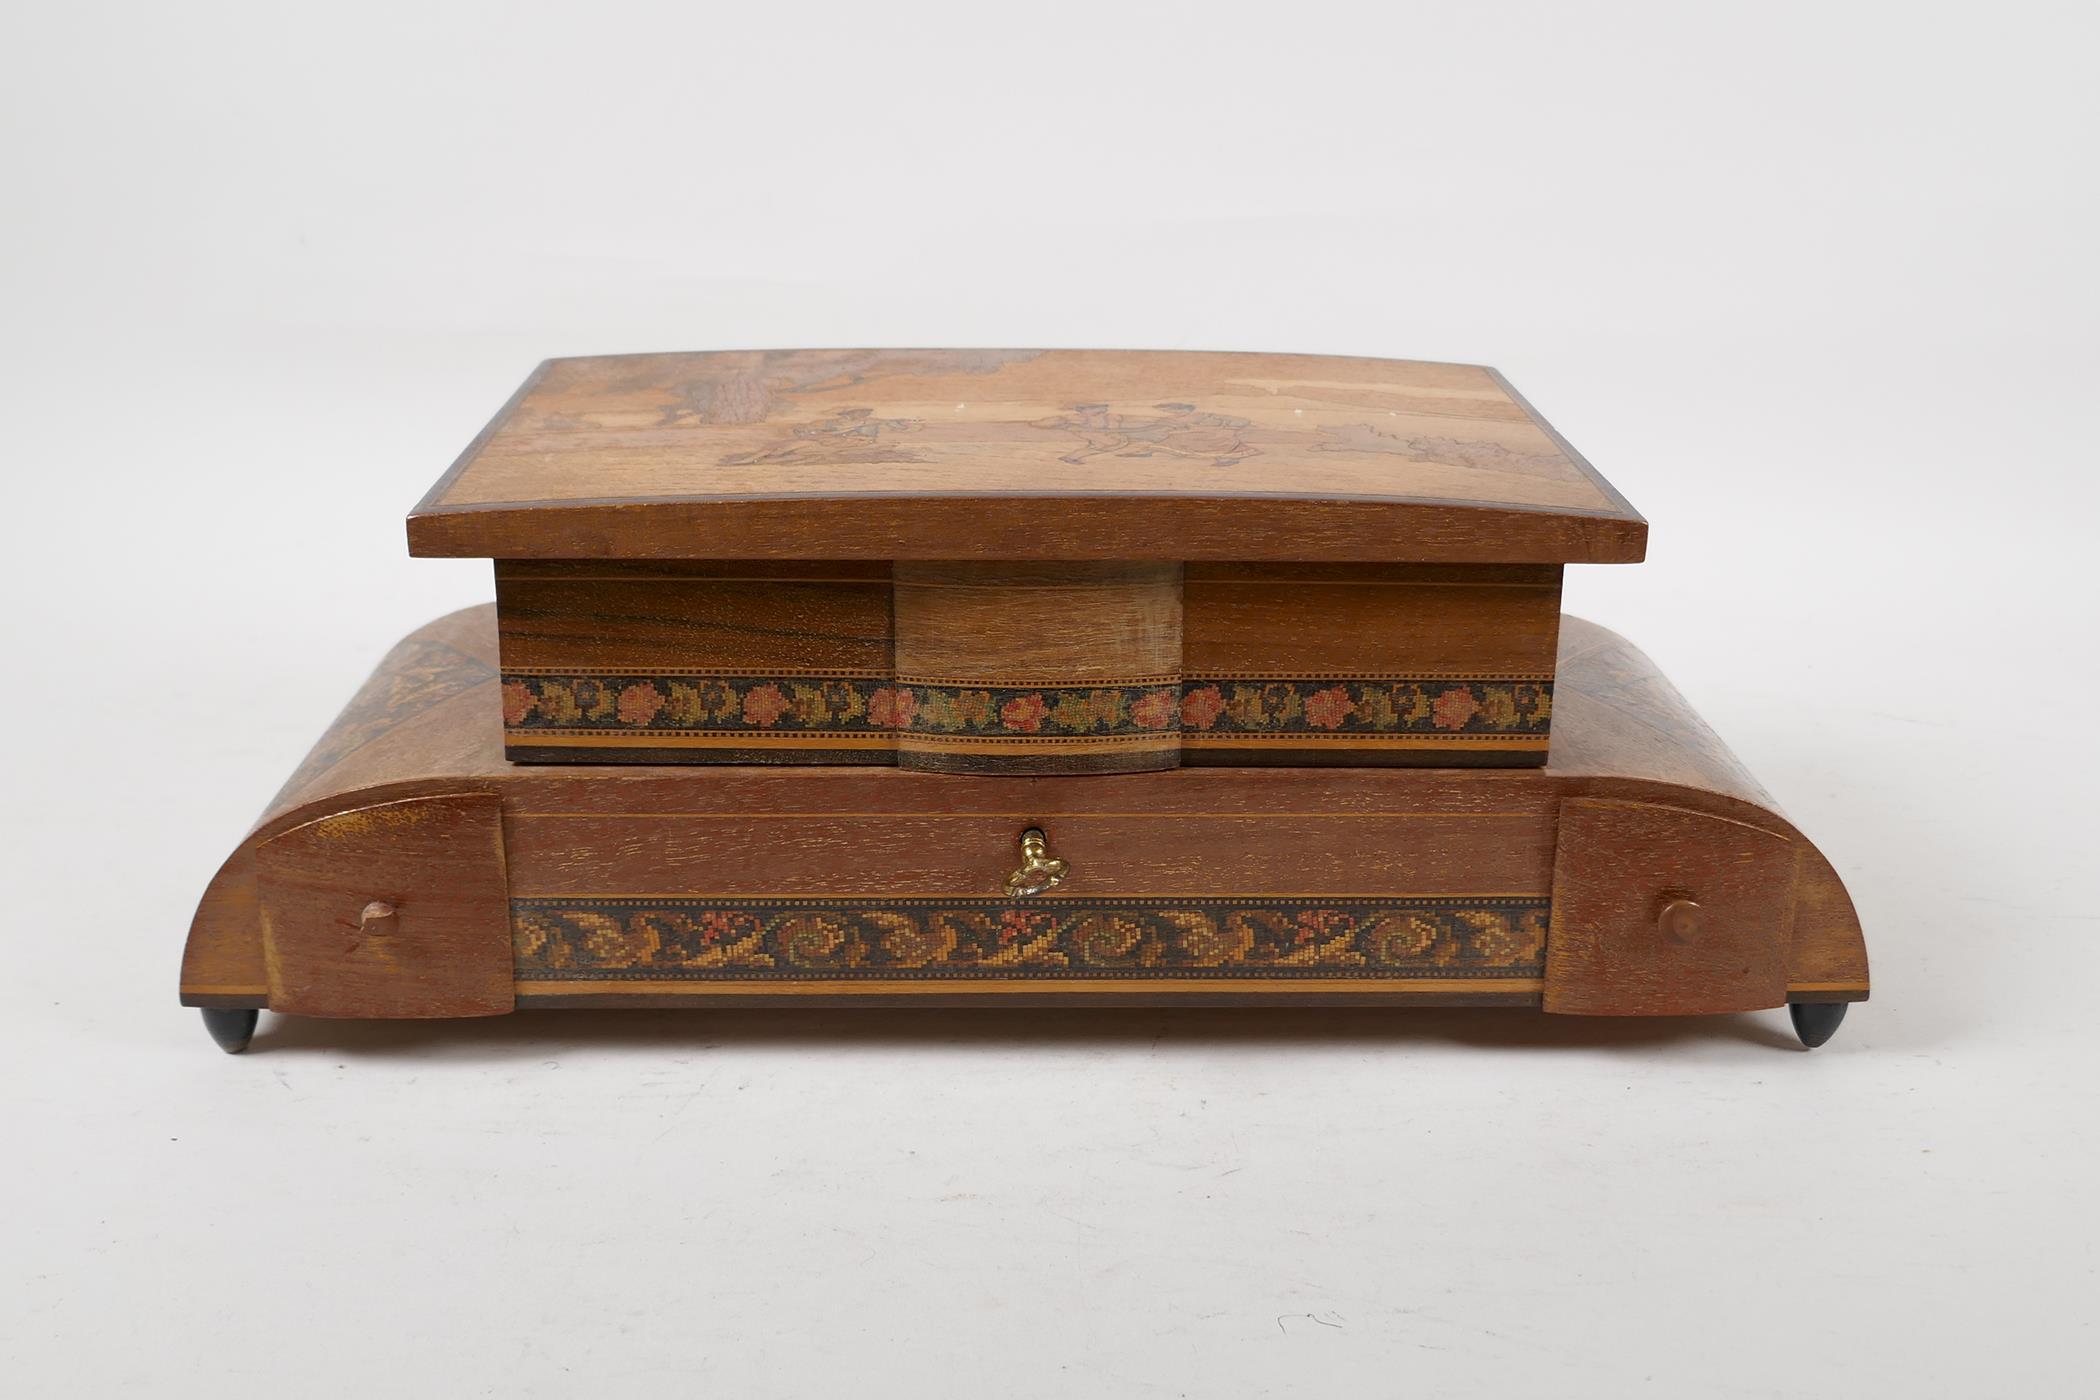 A Sorrento ware musical jewellery box, the marquetry cover decorated with a view across the Bay of